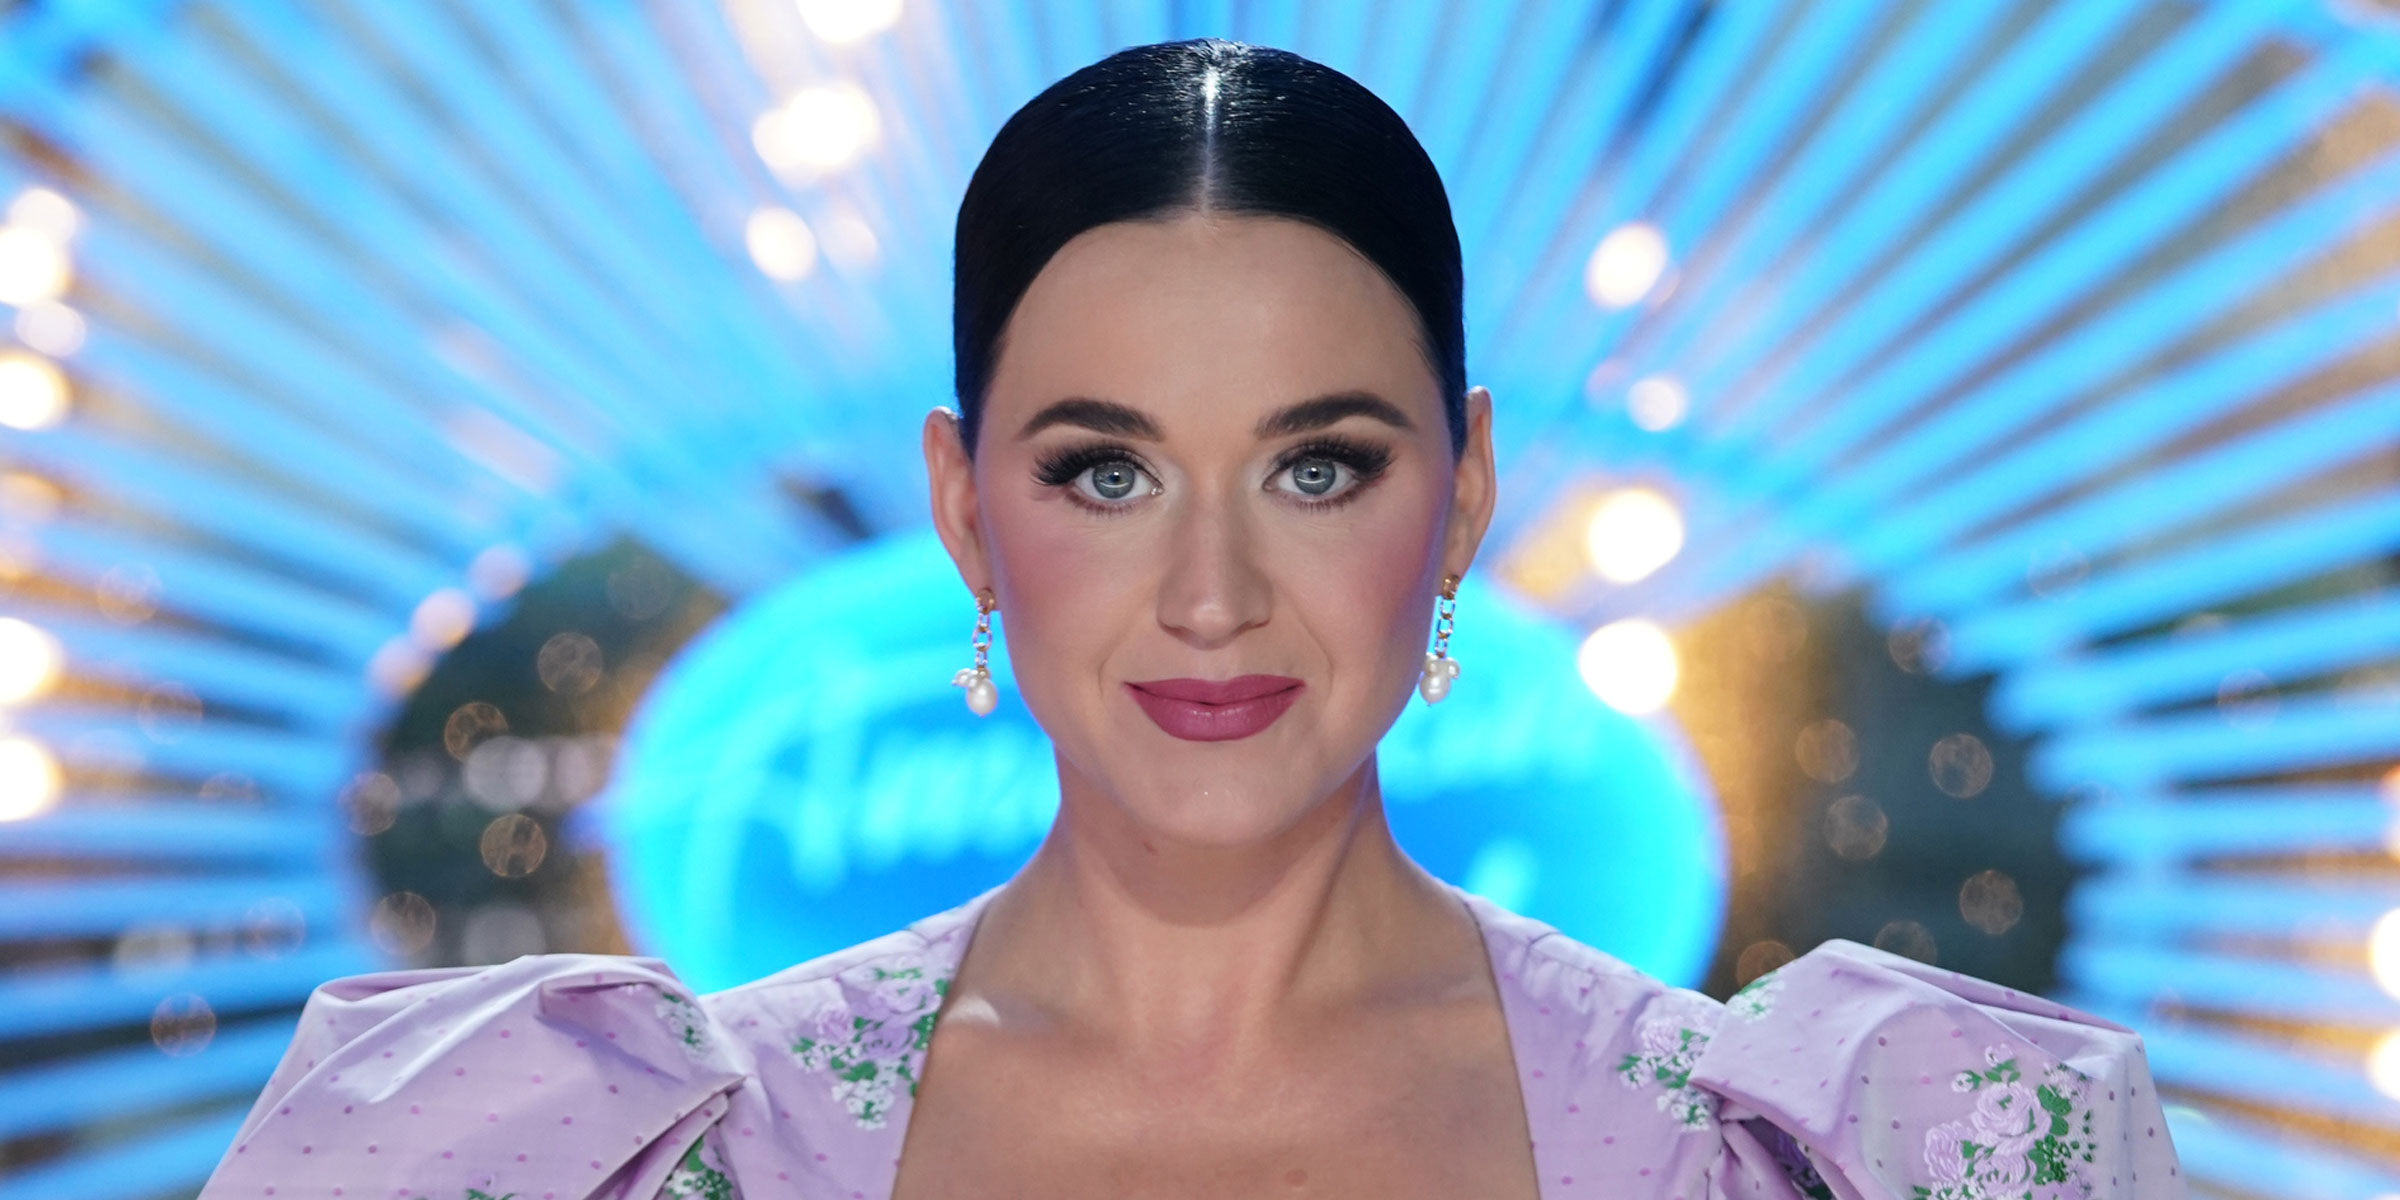 Katy Perry Movies And Tv Shows: Katy Perry Movies List 2023